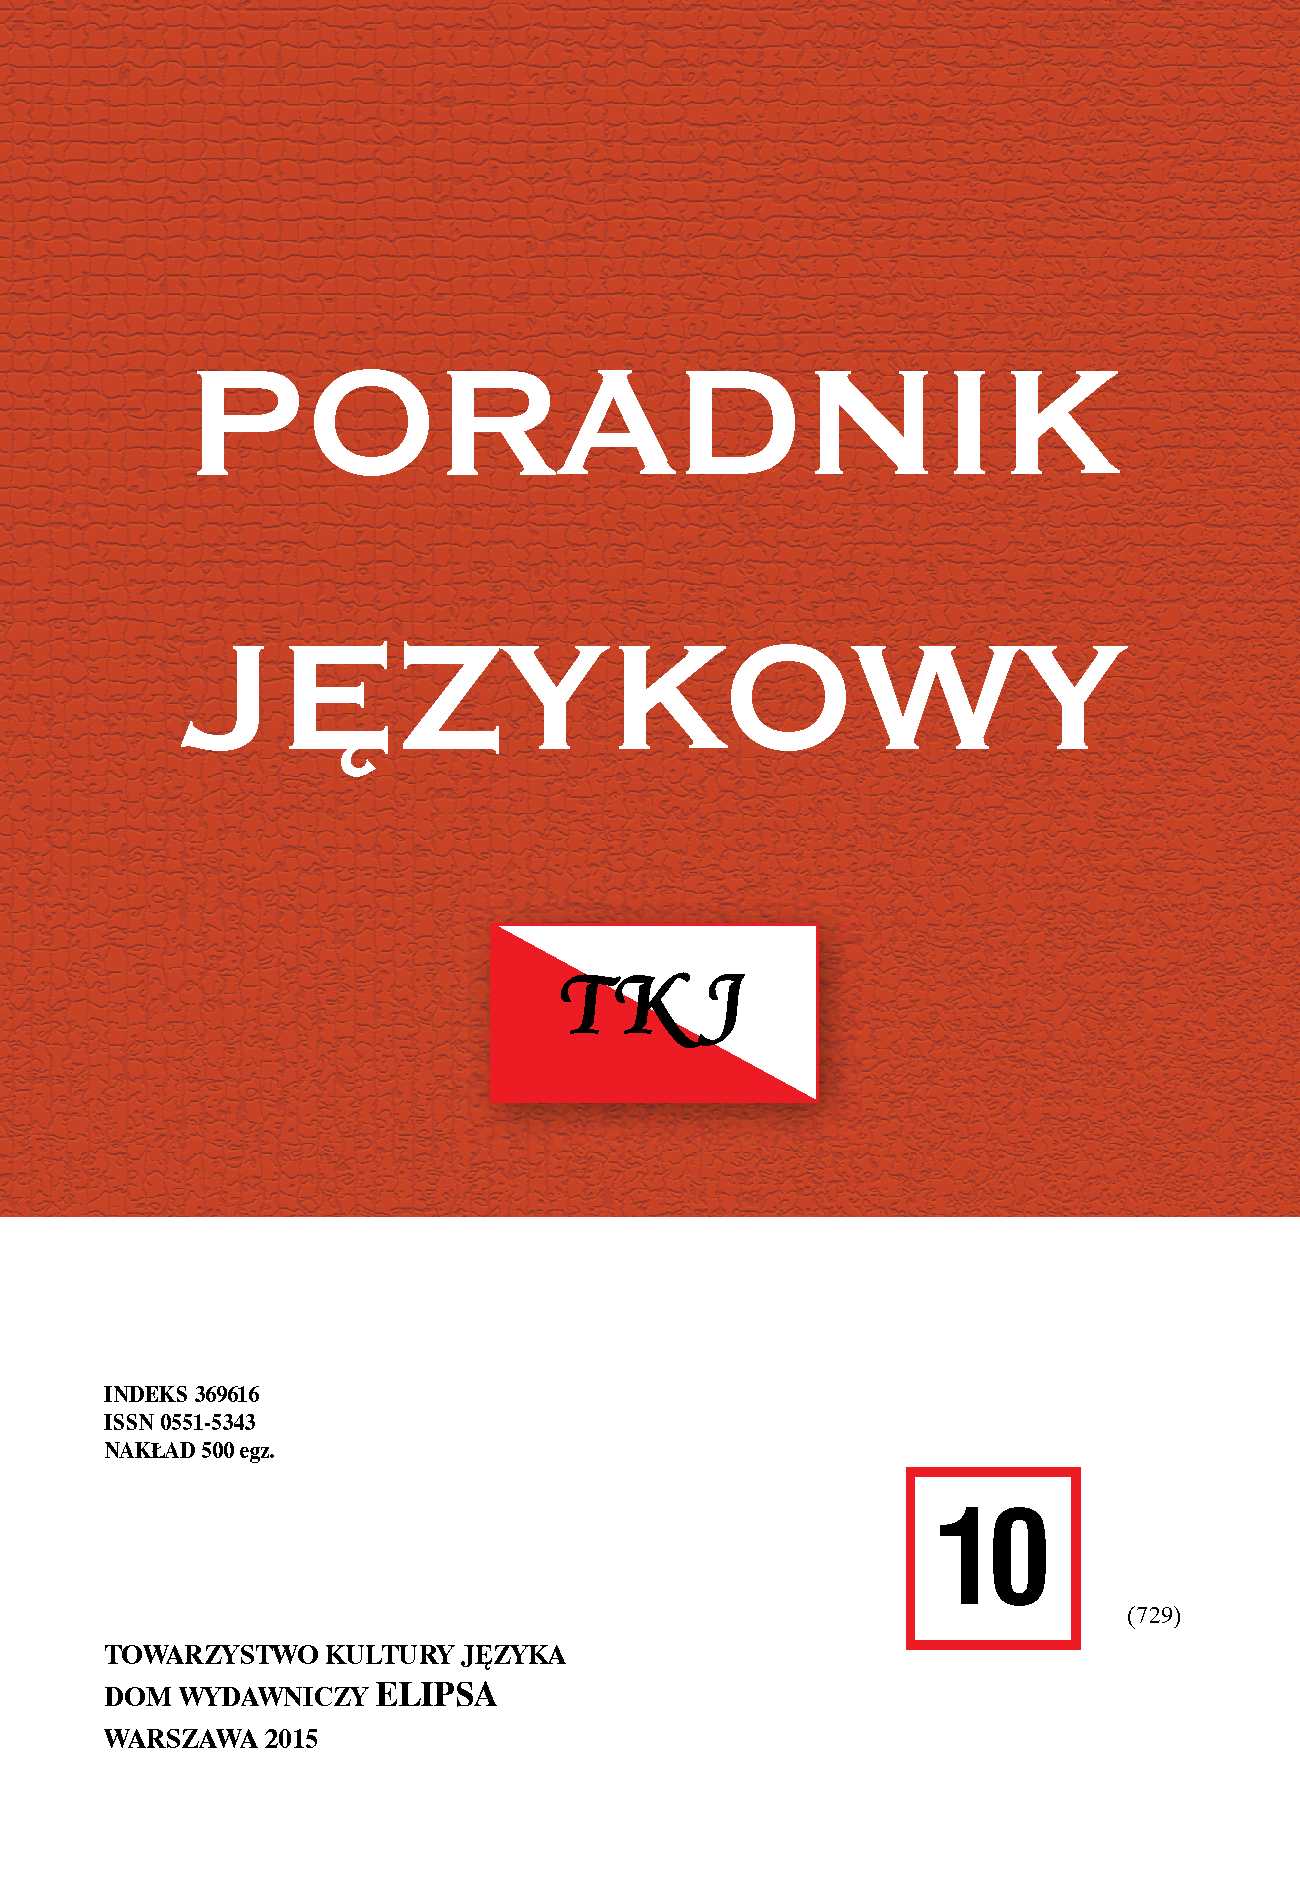 Słownik warmiński (Warmia dictionary) by Wiktor Steffen 30 years later. The idea, the method and the content Cover Image